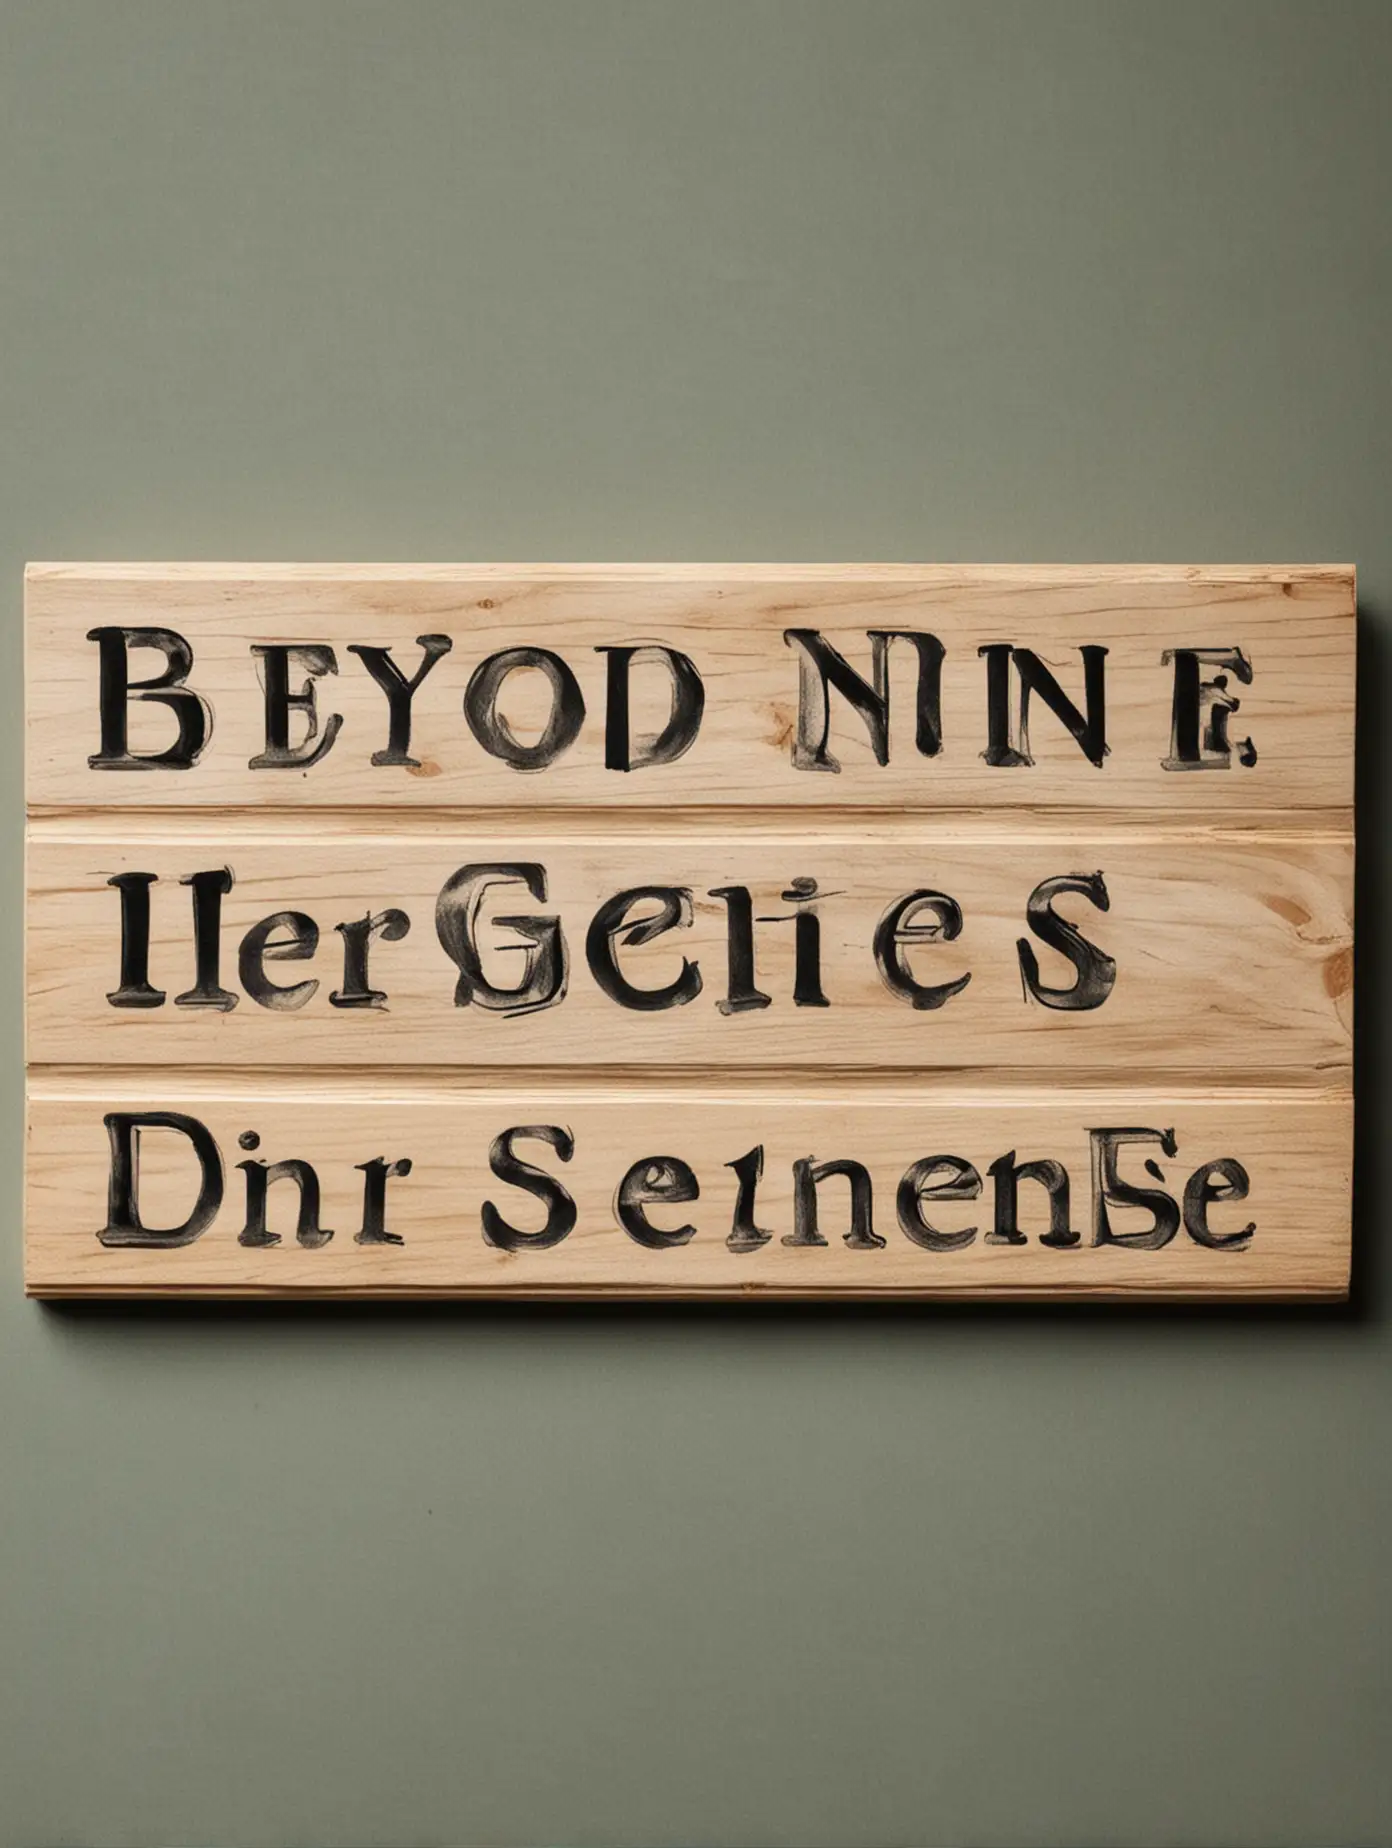 make a sign in the English language using a sans-serif font that says "Beyond your five senses"